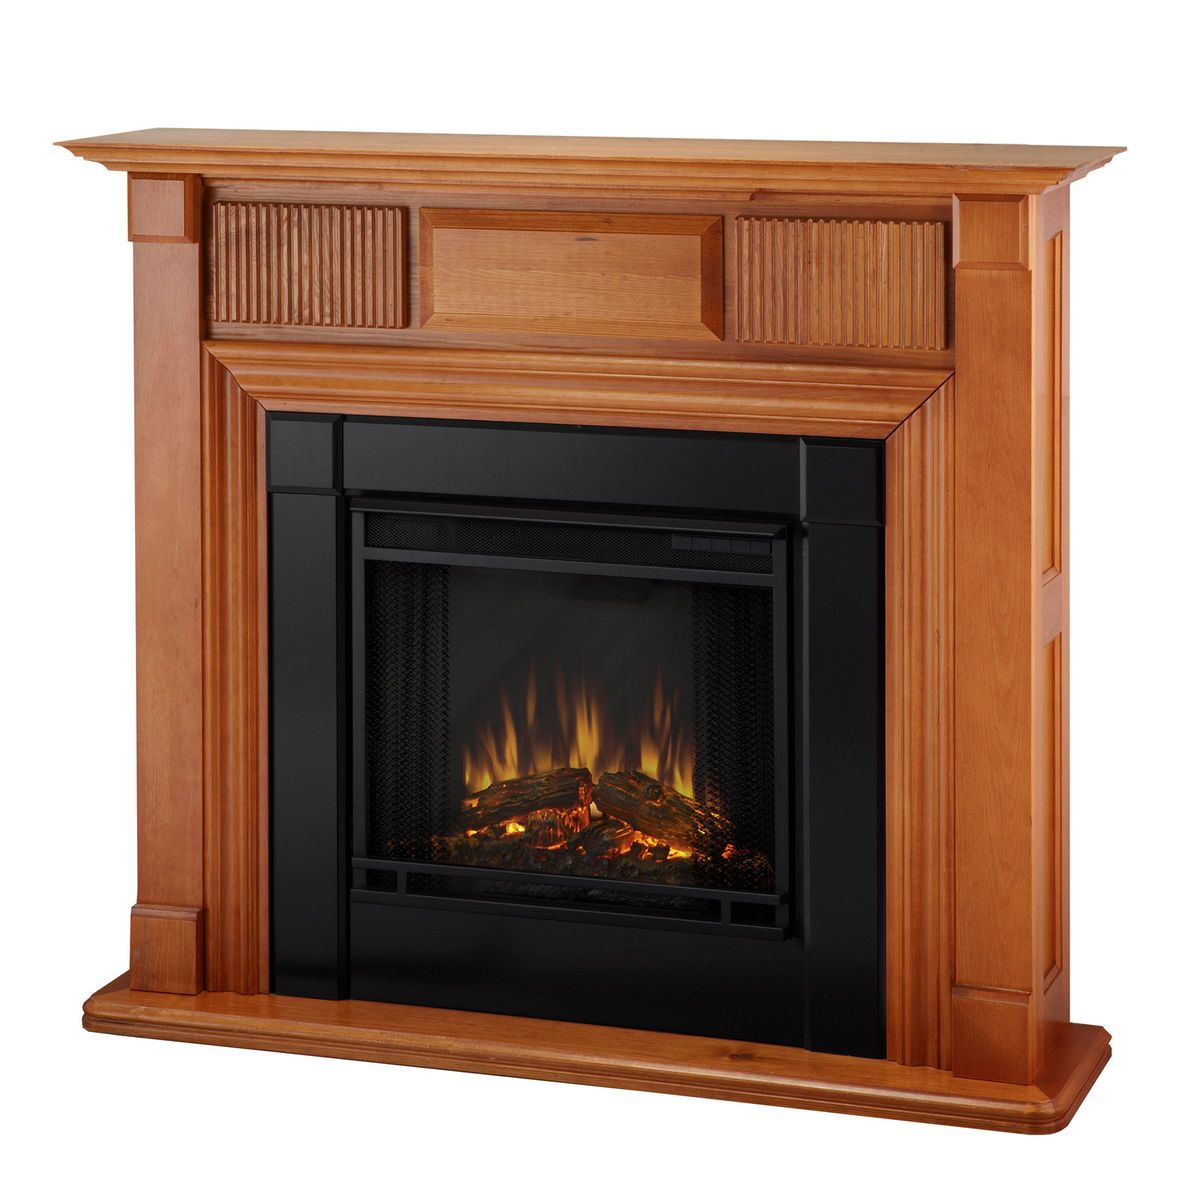 Real Flame Liberty Portable Electric Fireplace Heater OAK Free